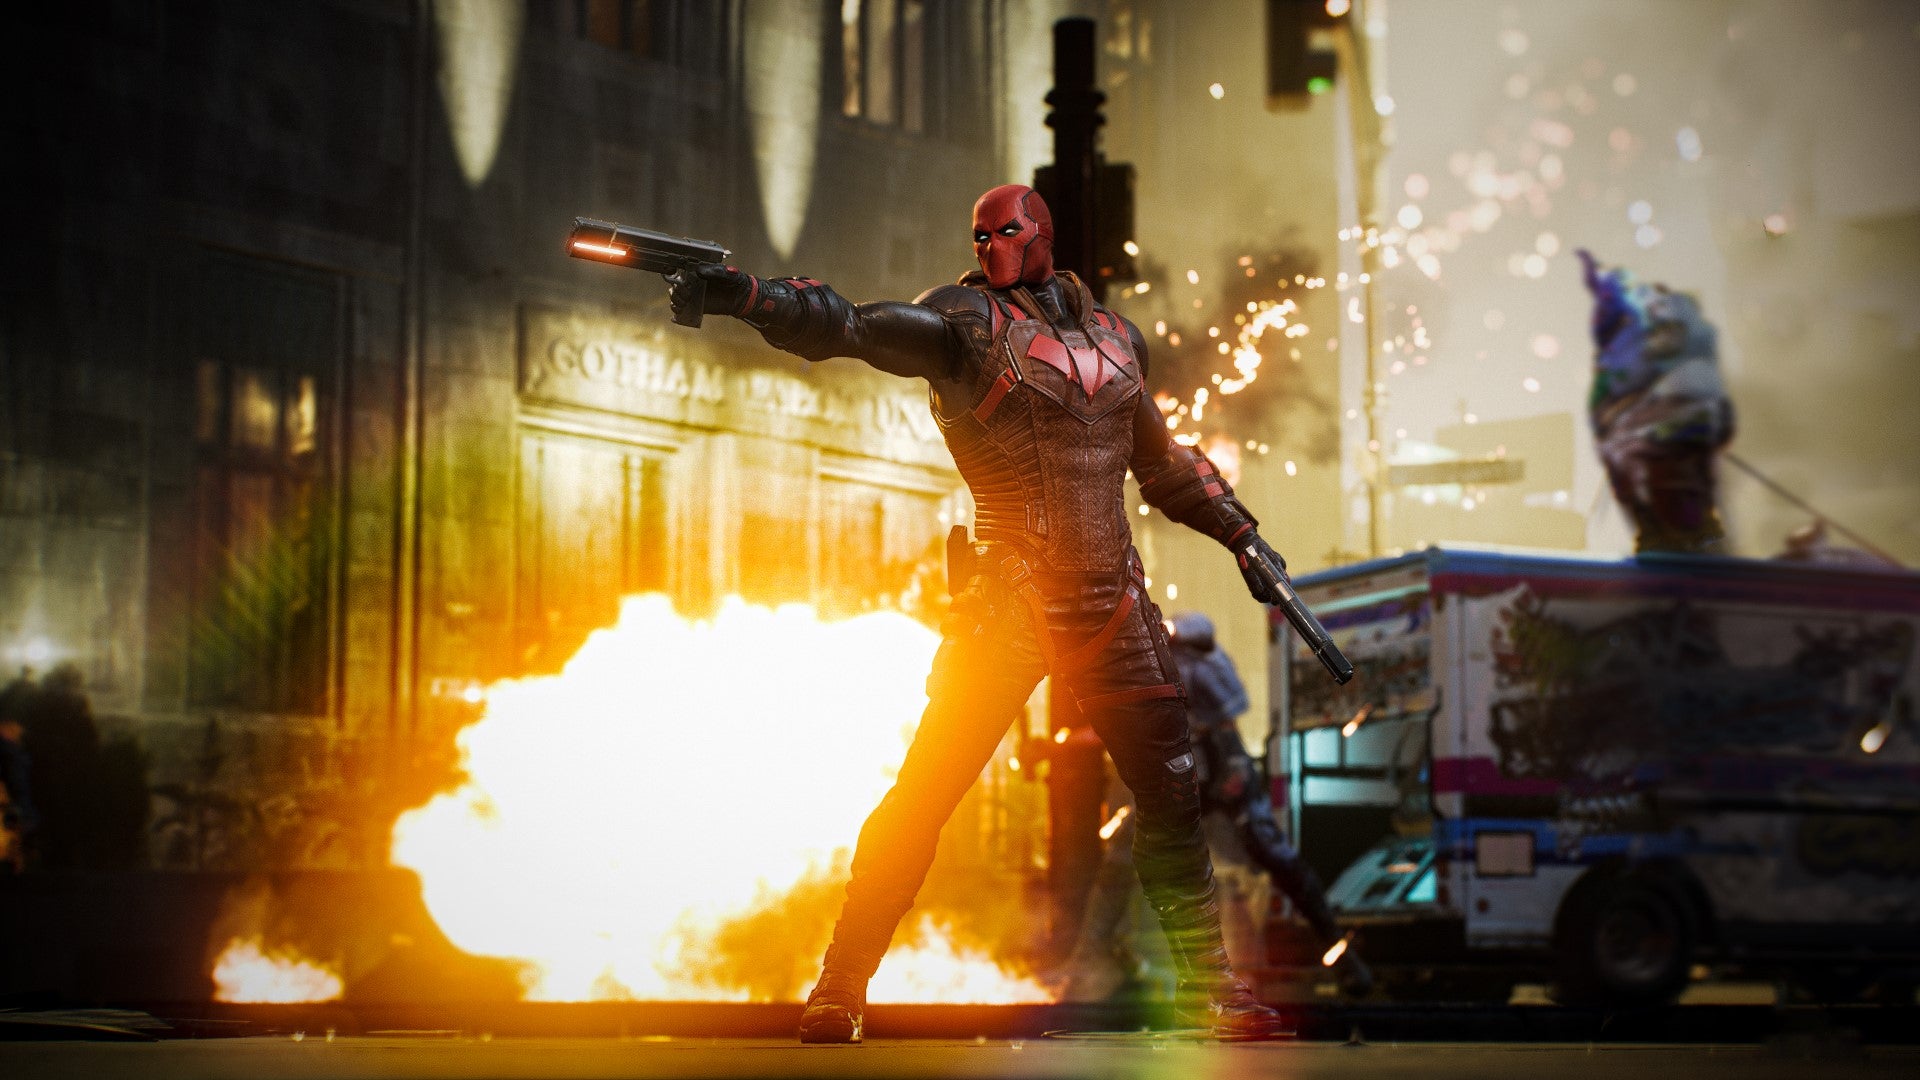 Red Hood fires off a shot as an explosion goes off behind him.